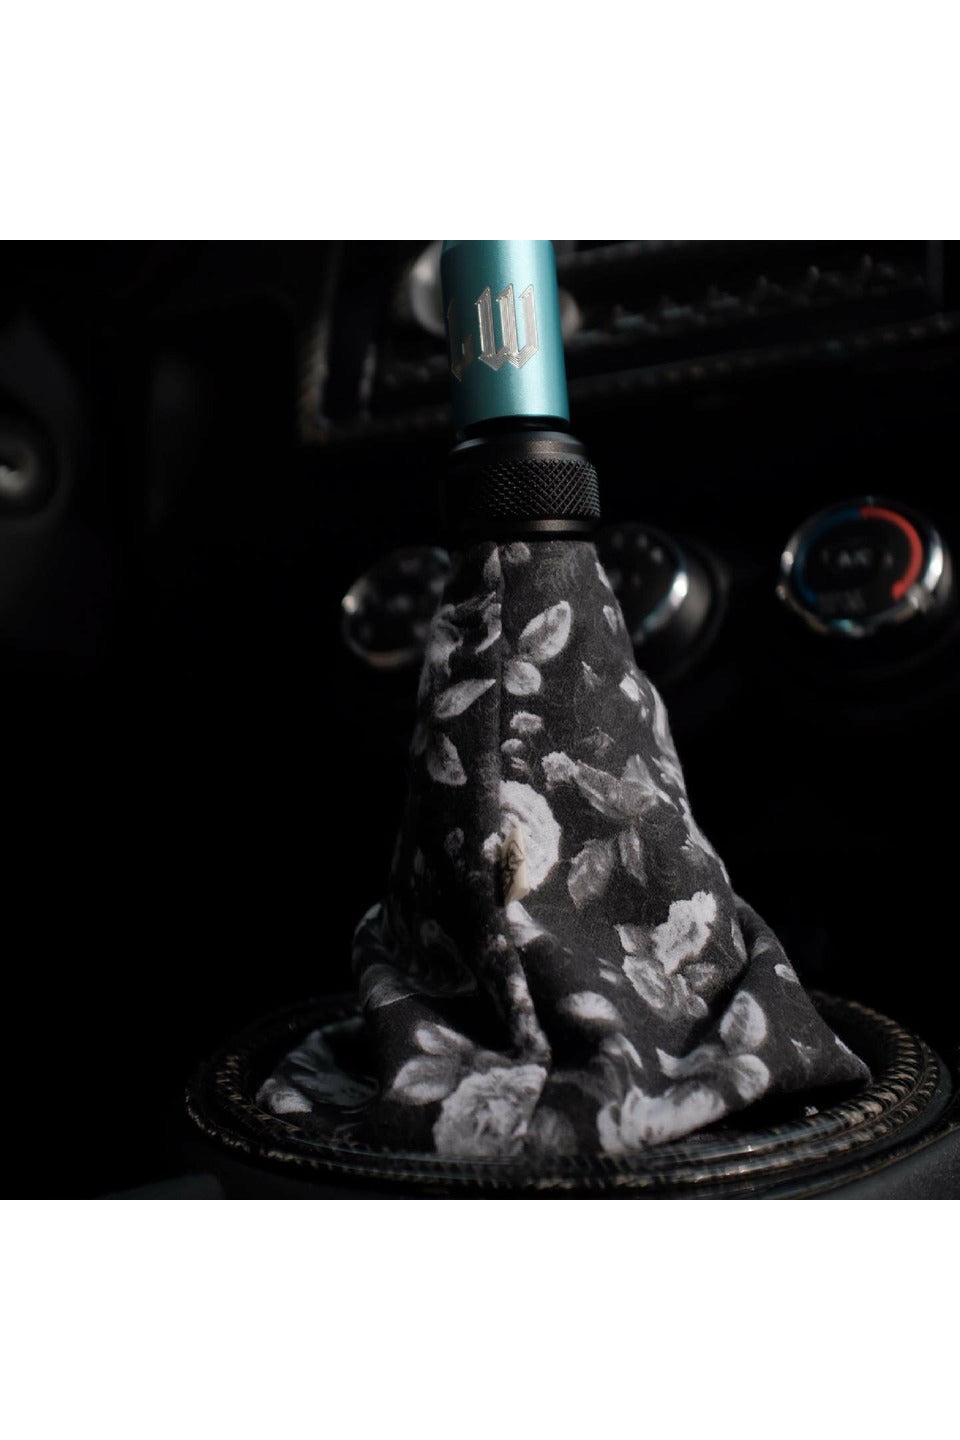 Black and White Floral Shift Boot